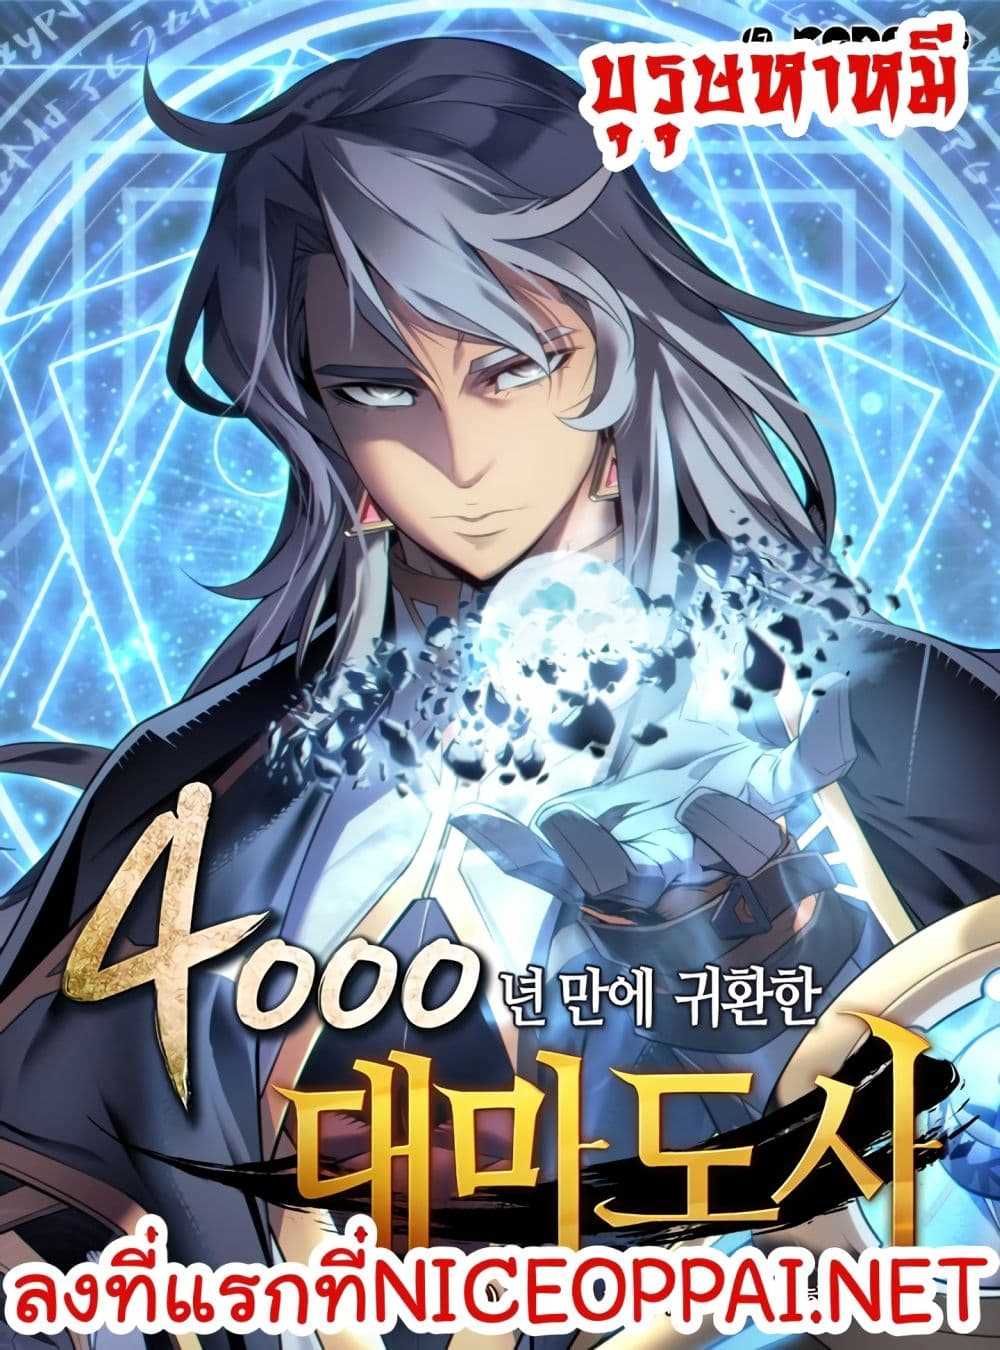 The Great Mage Returns After 4000 Years 9 (1)